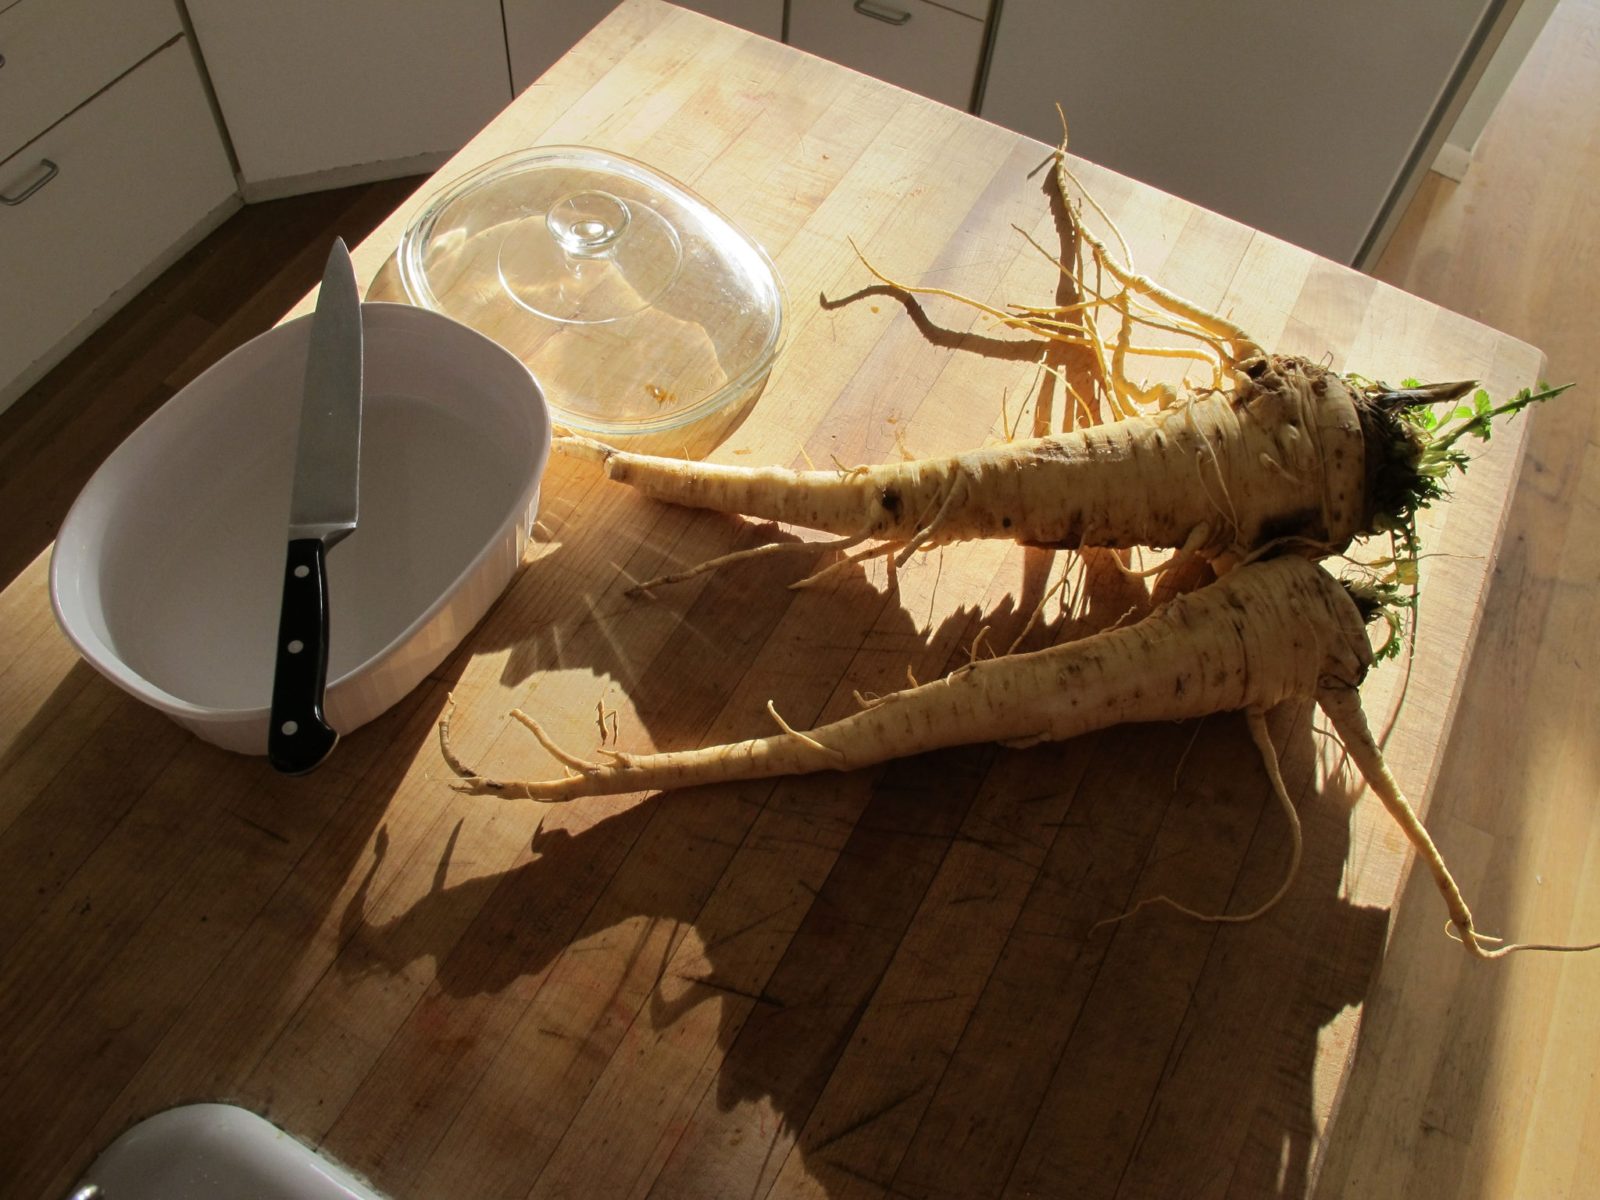 Two parsnips on a kitchen cutting board